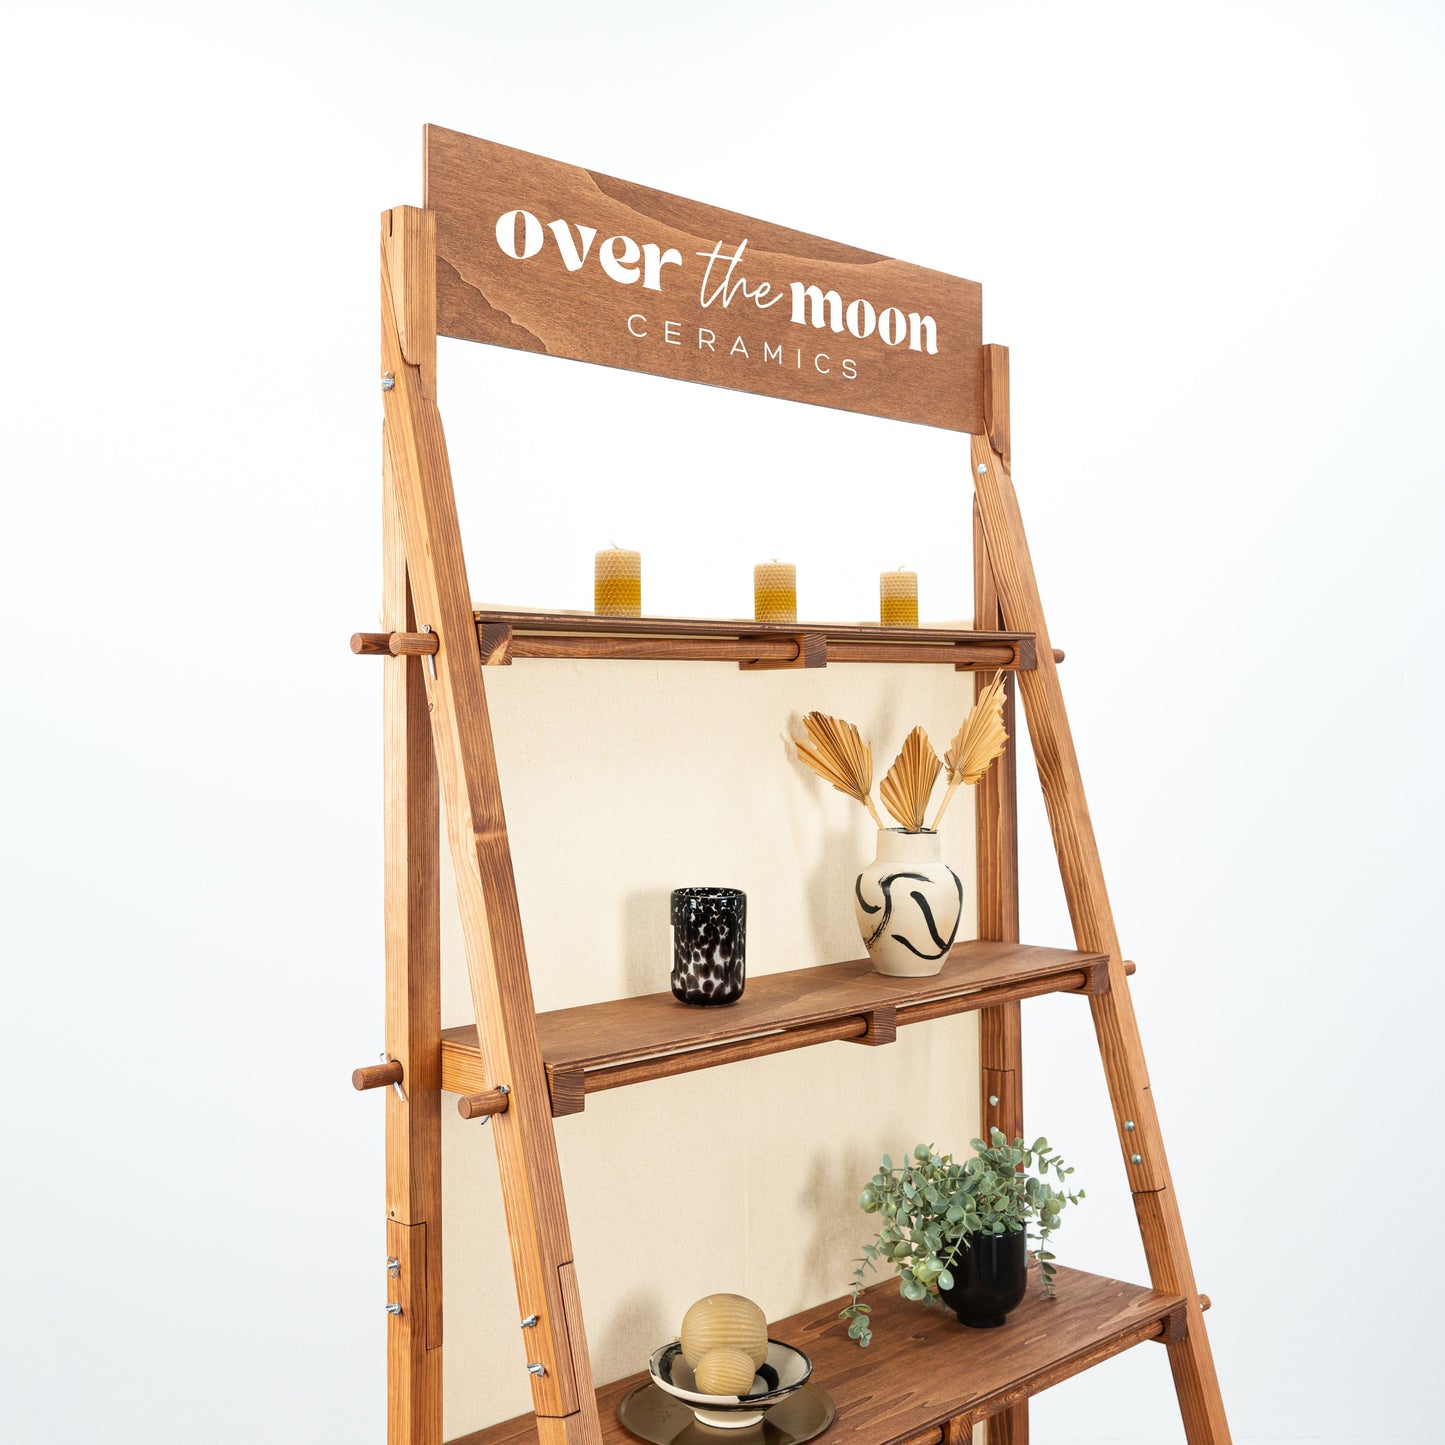 Portable lightweight shelving unit VS-05-CF to be placed against the wall, for shops and events